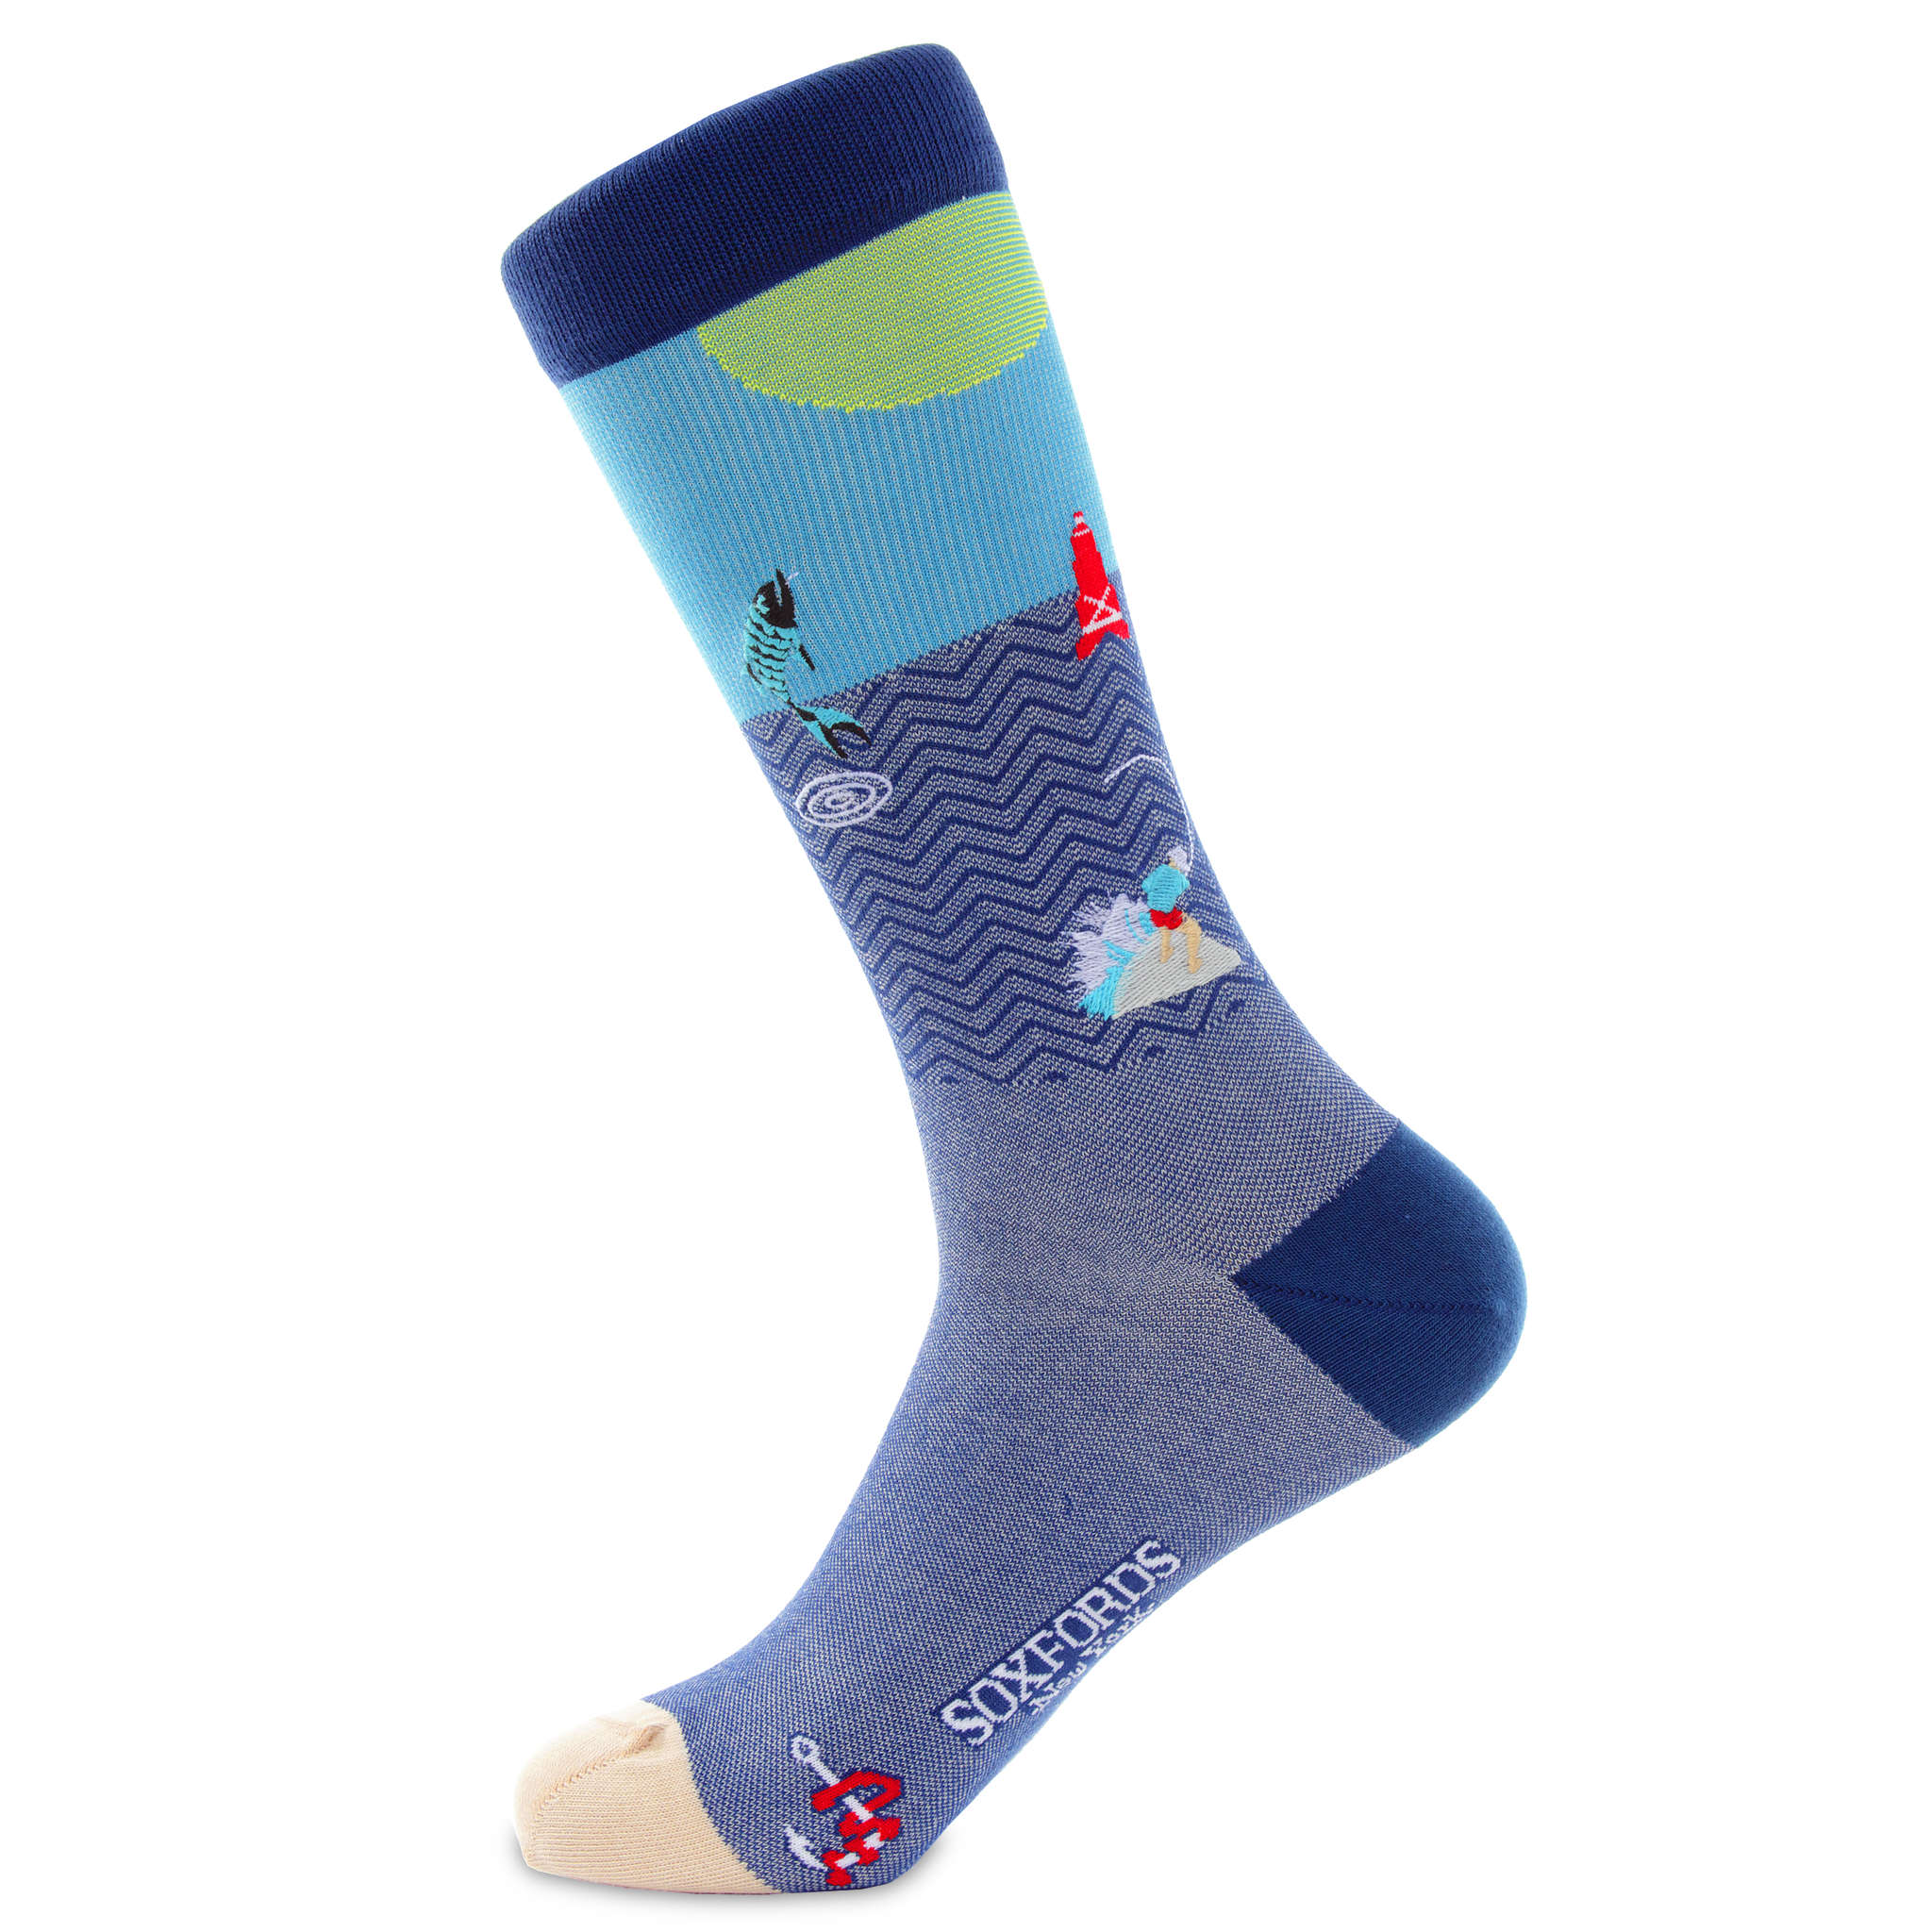 Men's Blue Cast King Fishing-Themed Socks by Soxfords | Soxfords